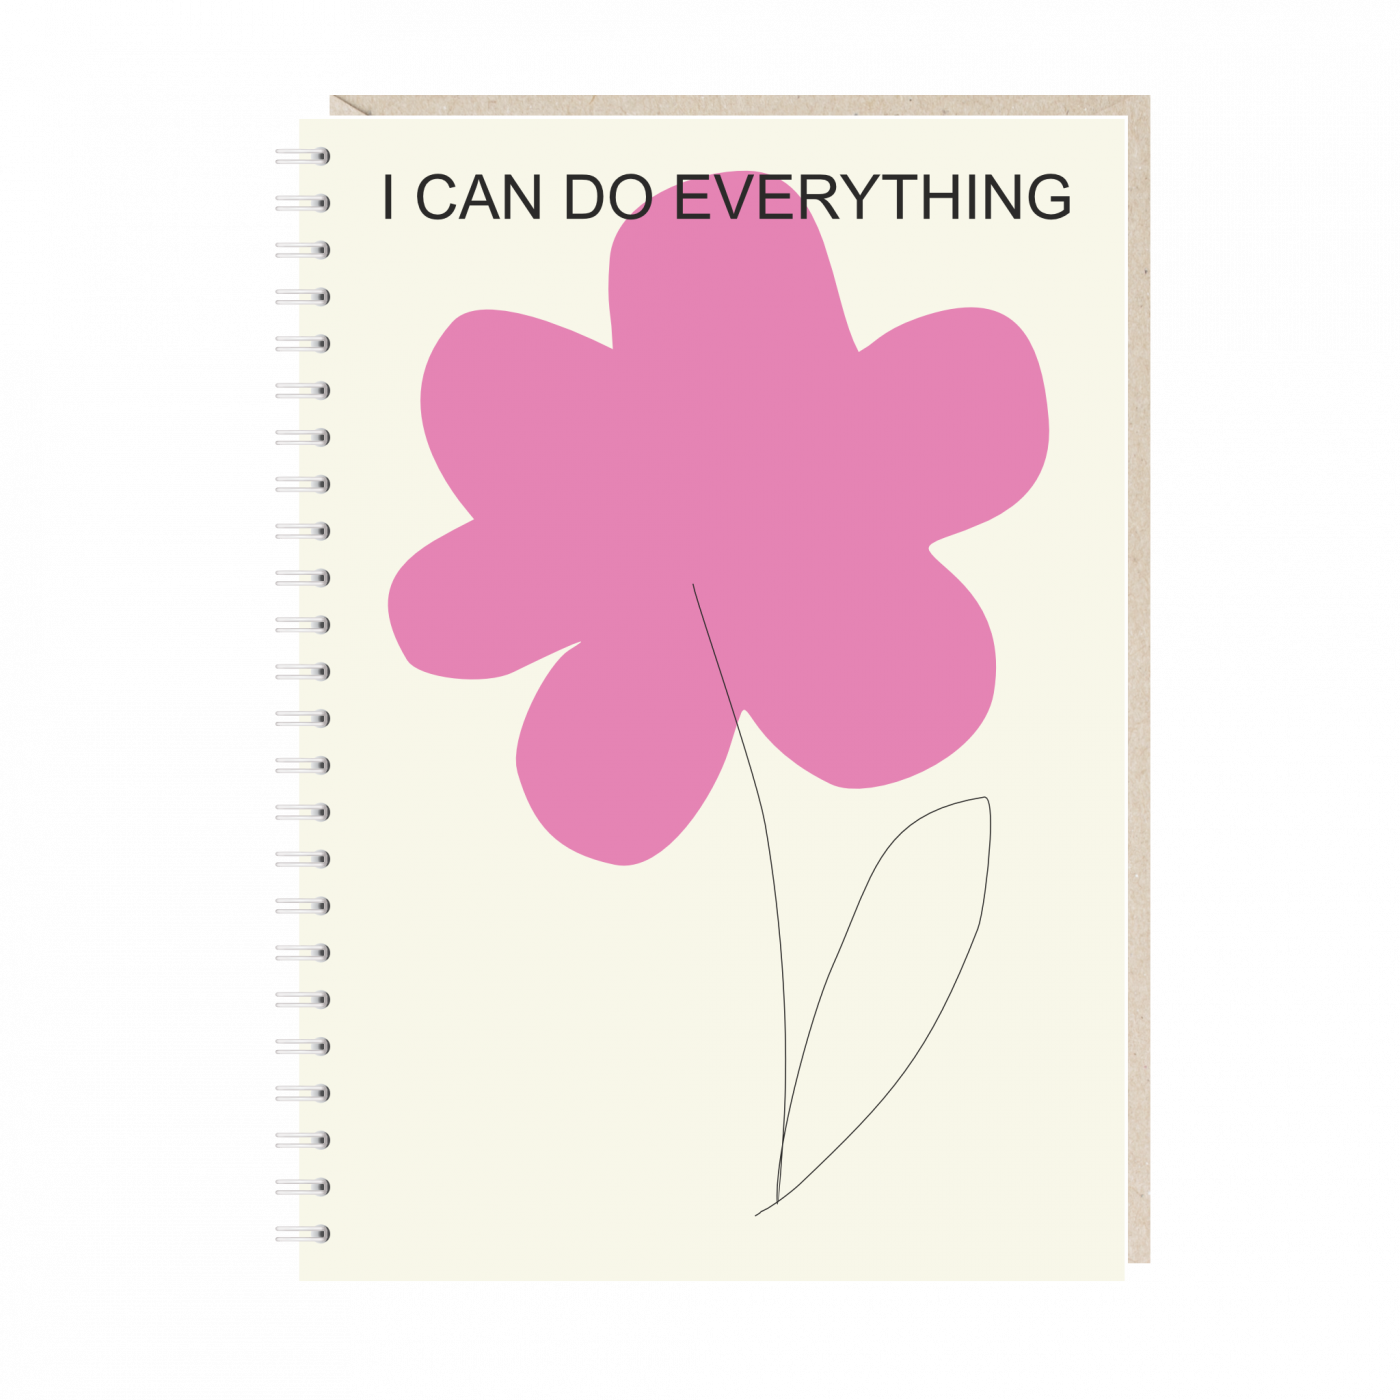  i can do everything